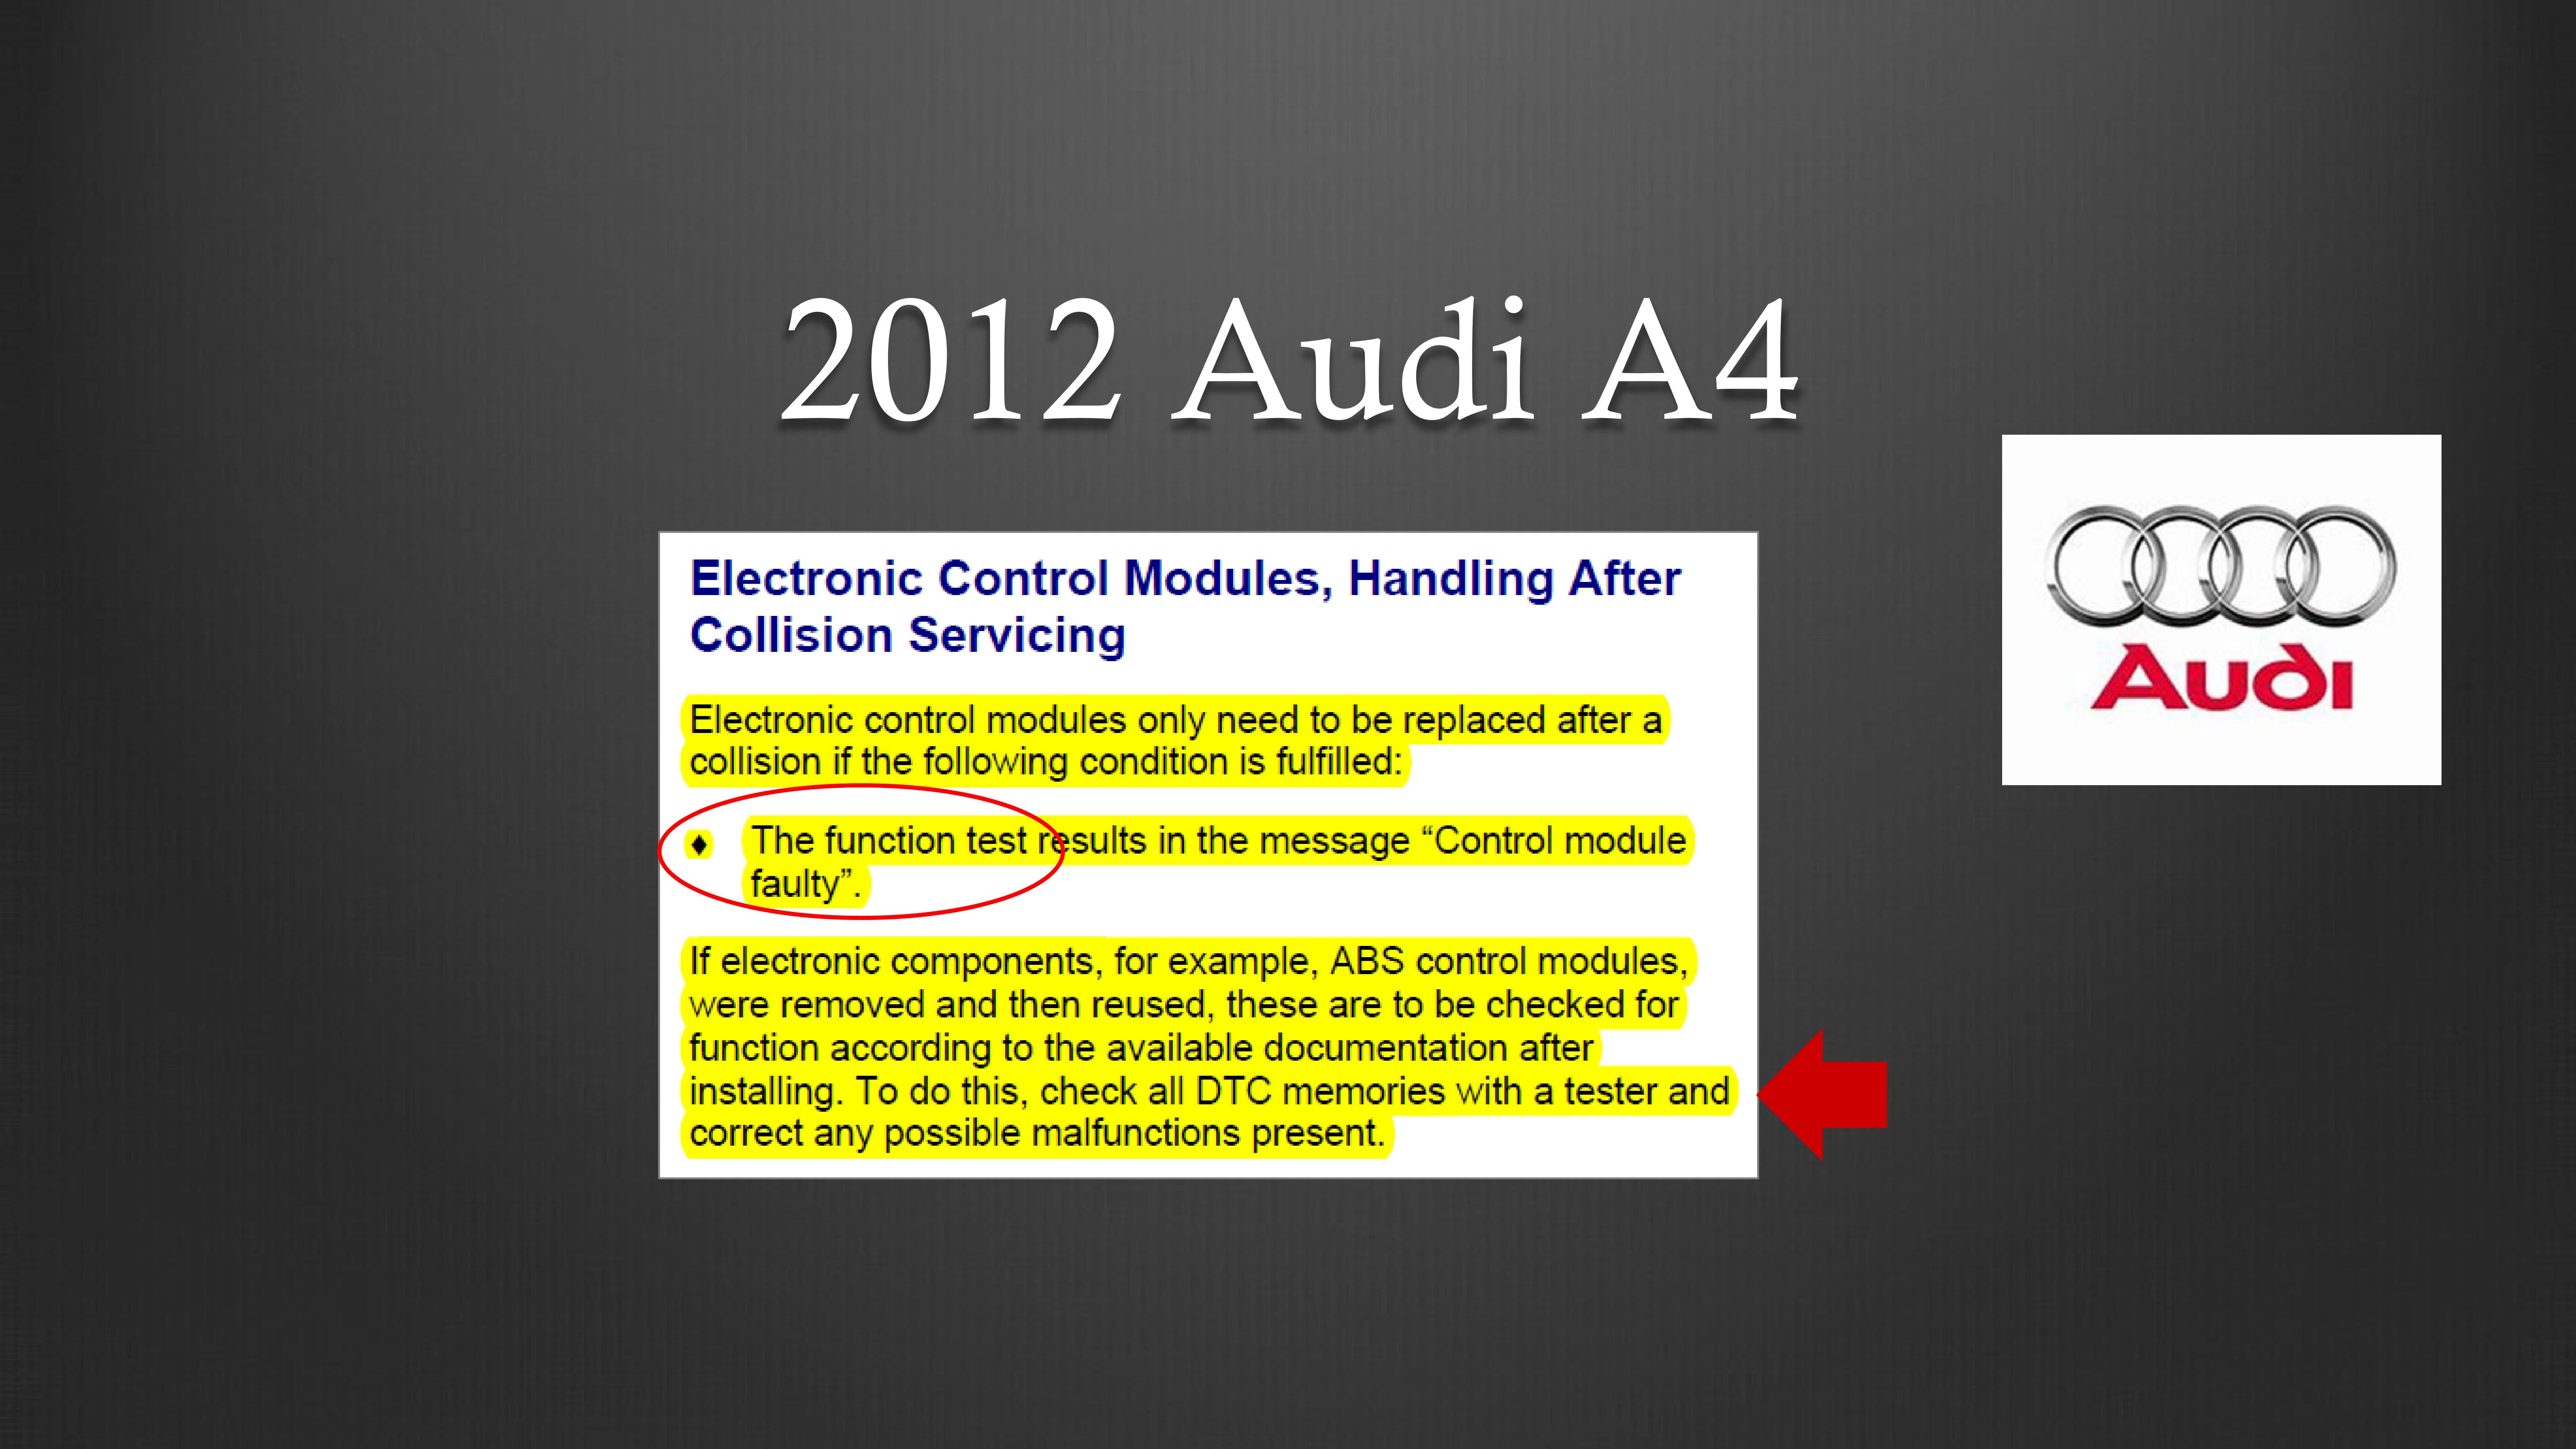 Is Thera A Printed Version Of 2012 Audi Service Manual